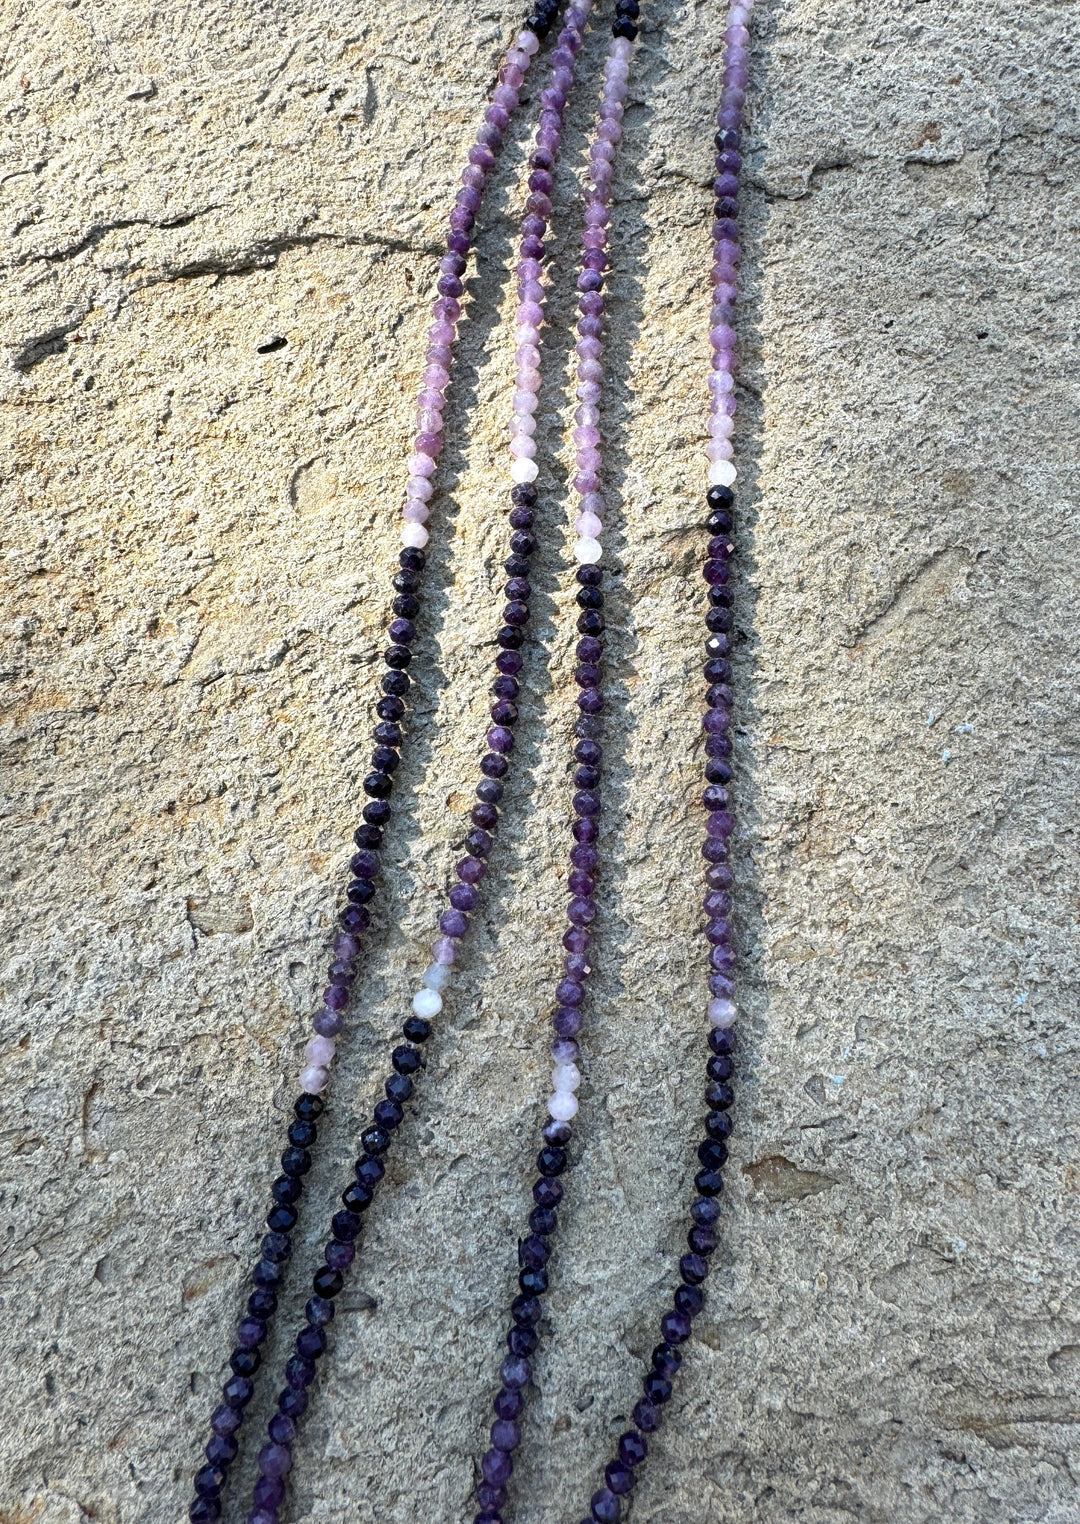 RARE Sugilite Micro Faceted 3mm Round Beads 13 inch Strand